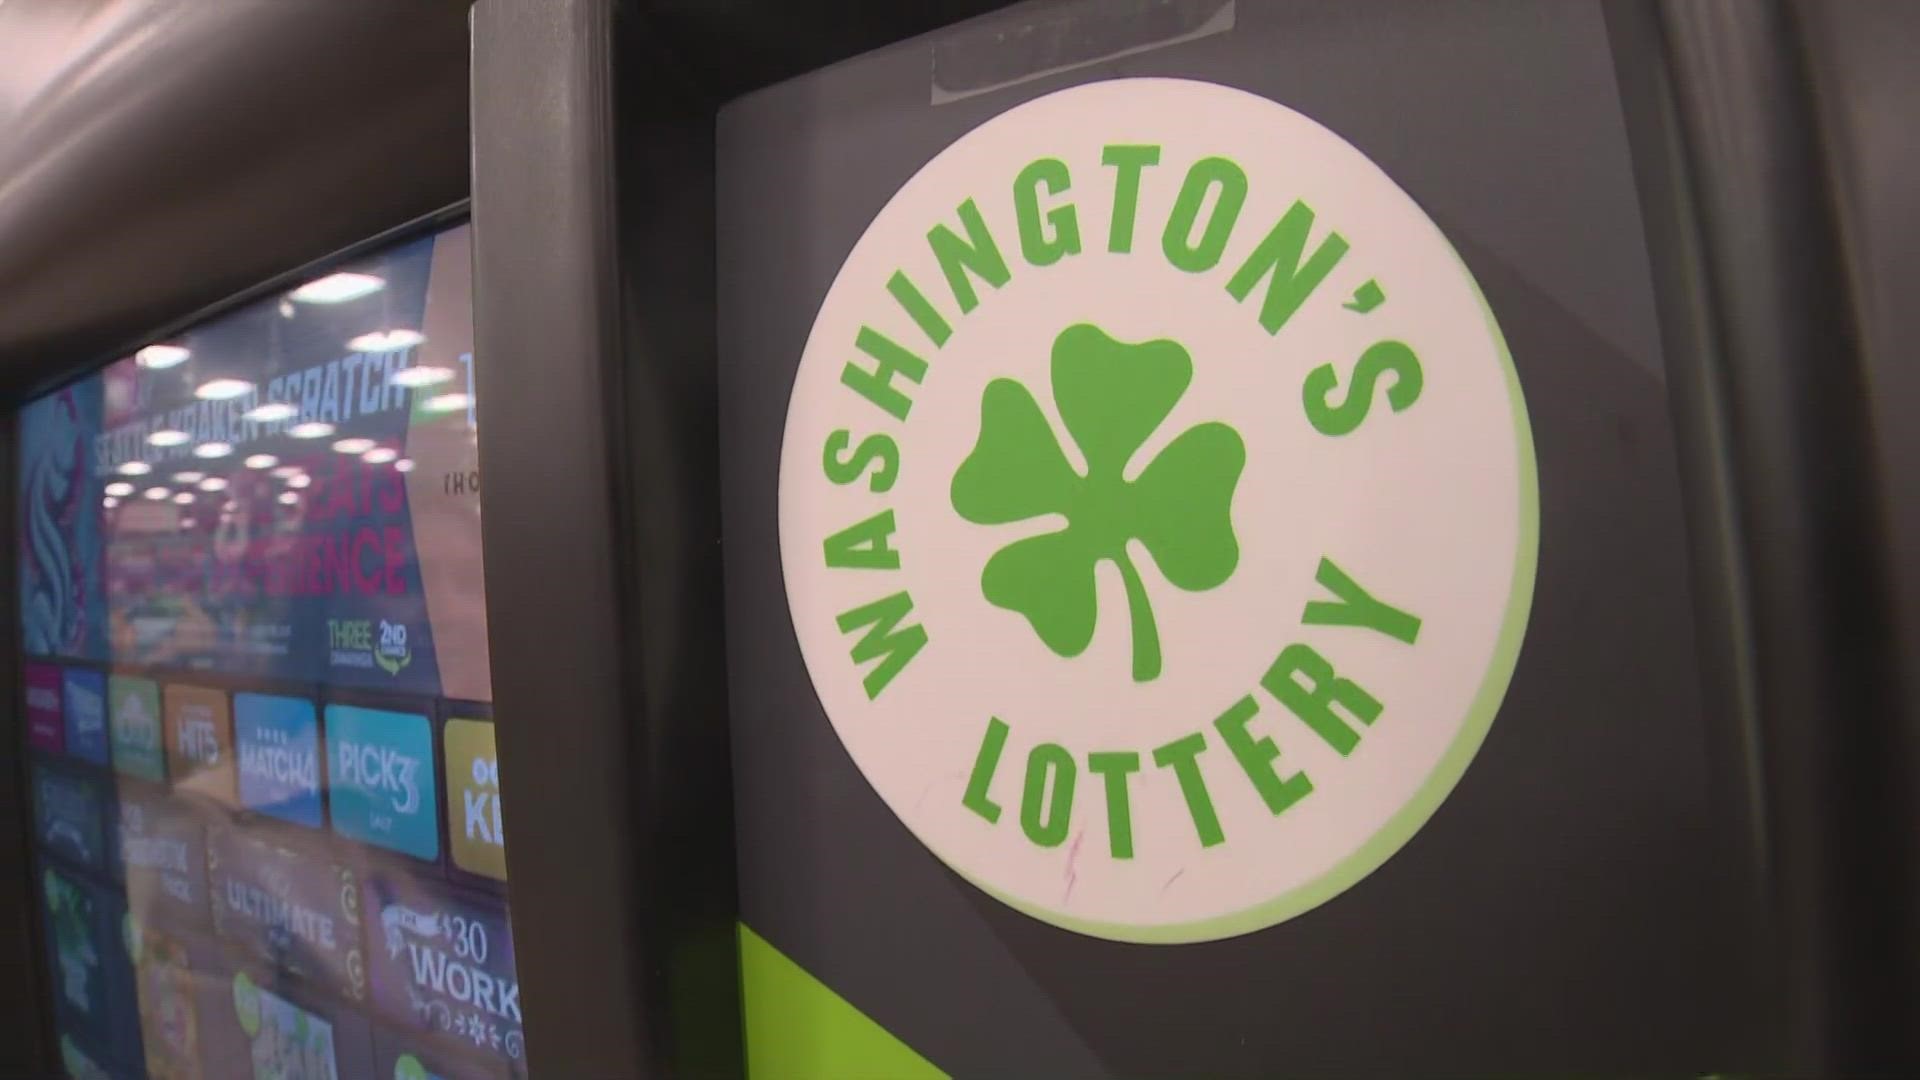 The winning ticket was sold on Feb. 5 and is the fifth-largest ticket in the game's history.